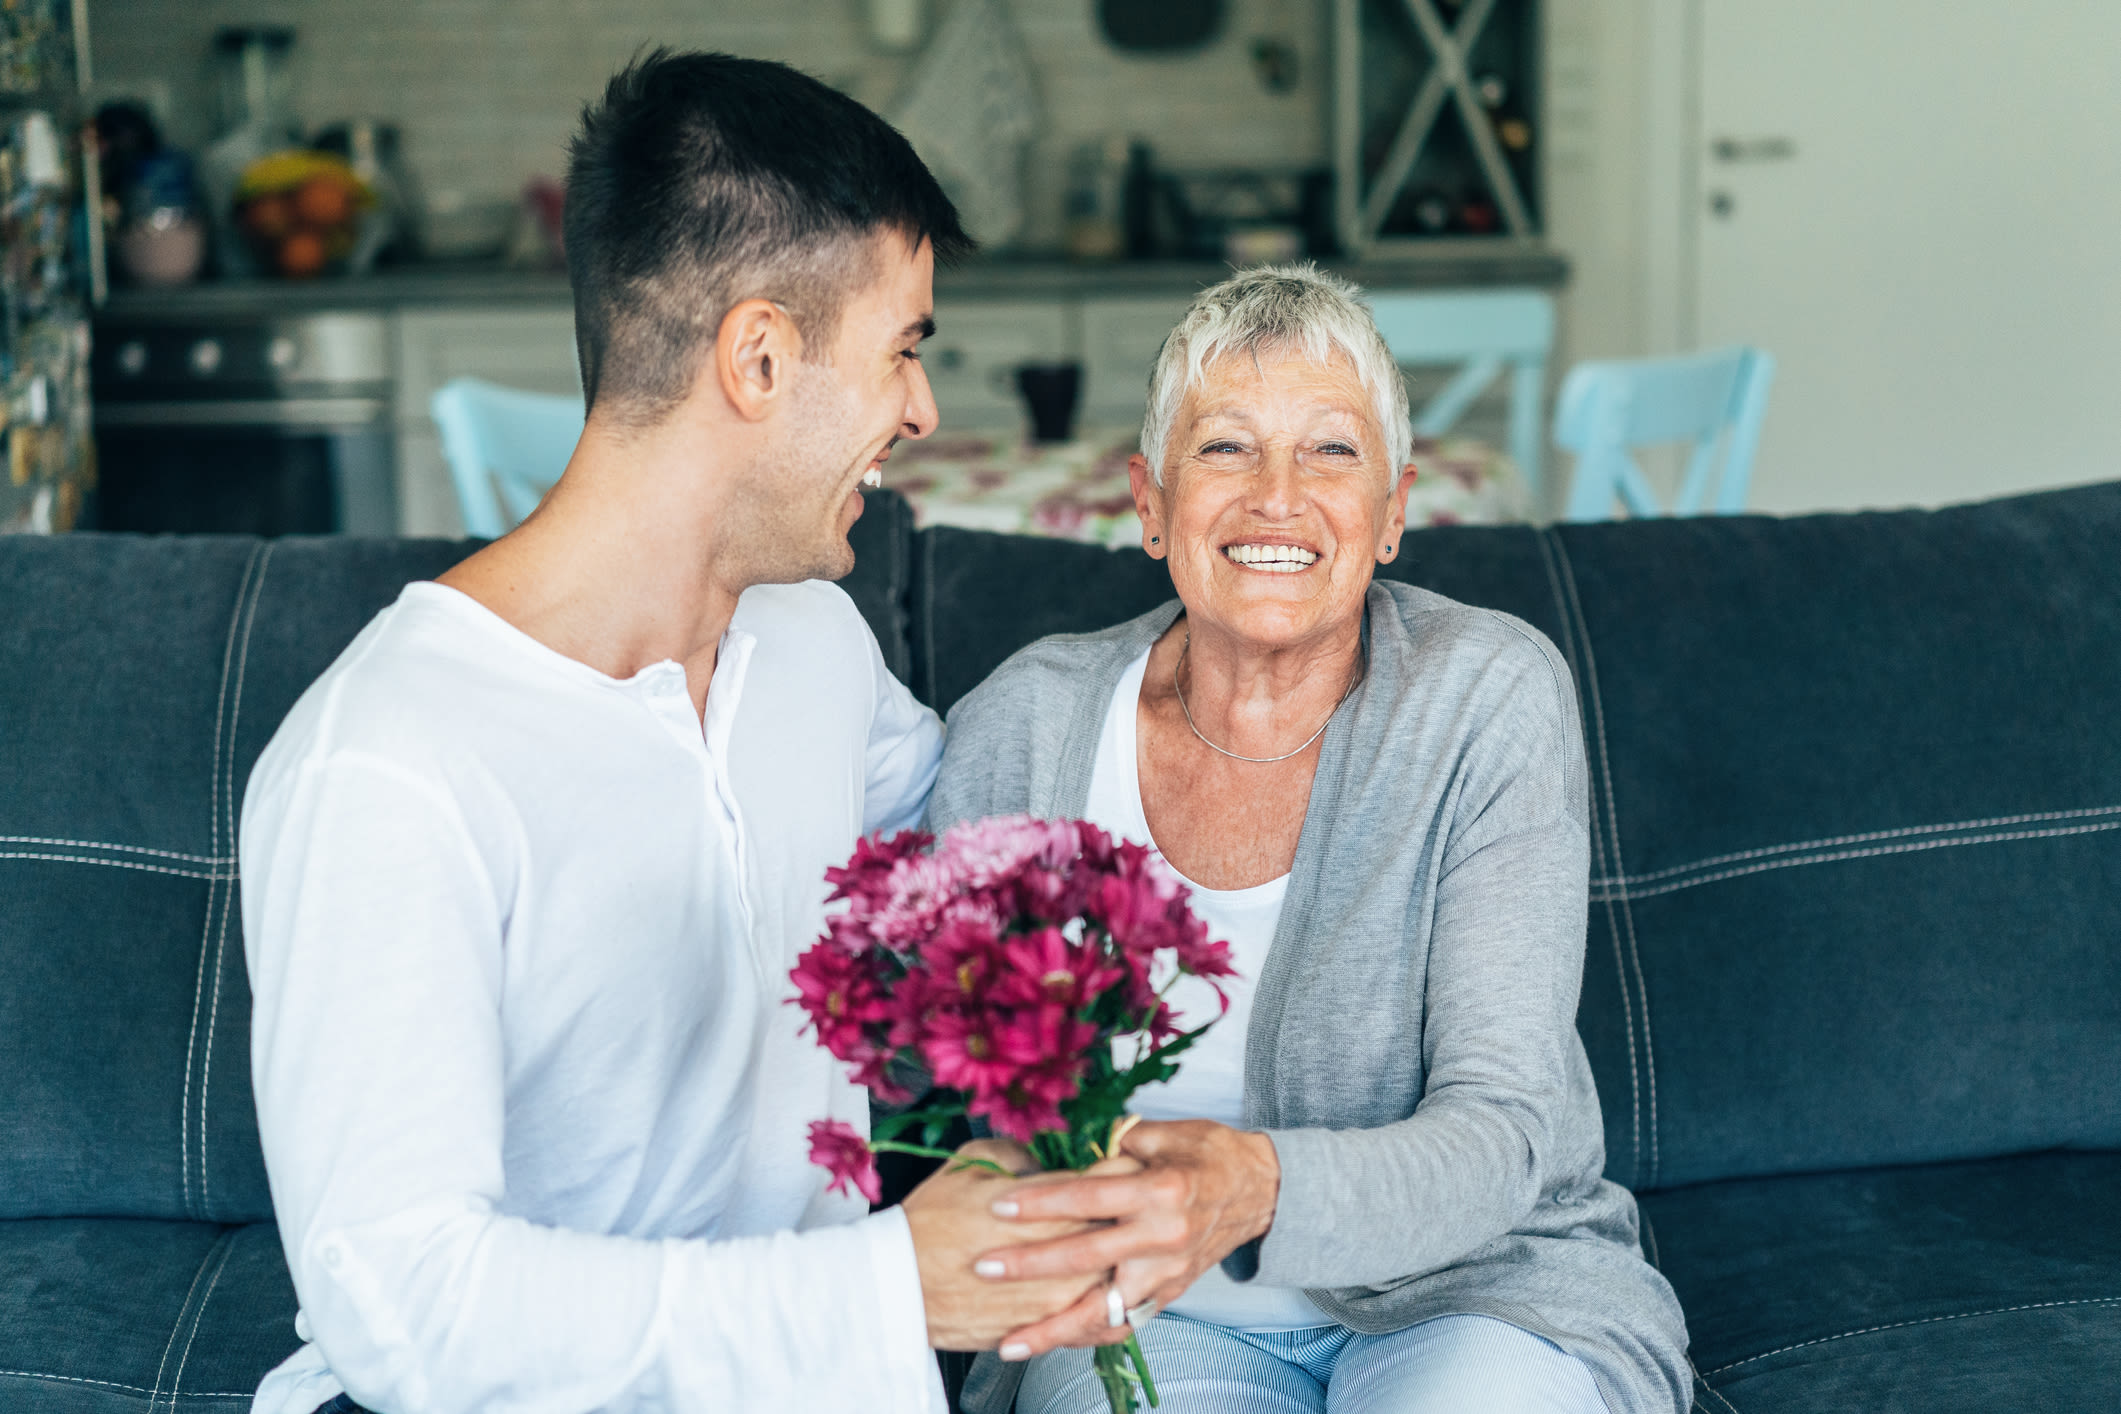 A man sits on a sofa, handing a bouquet of flowers to his mum